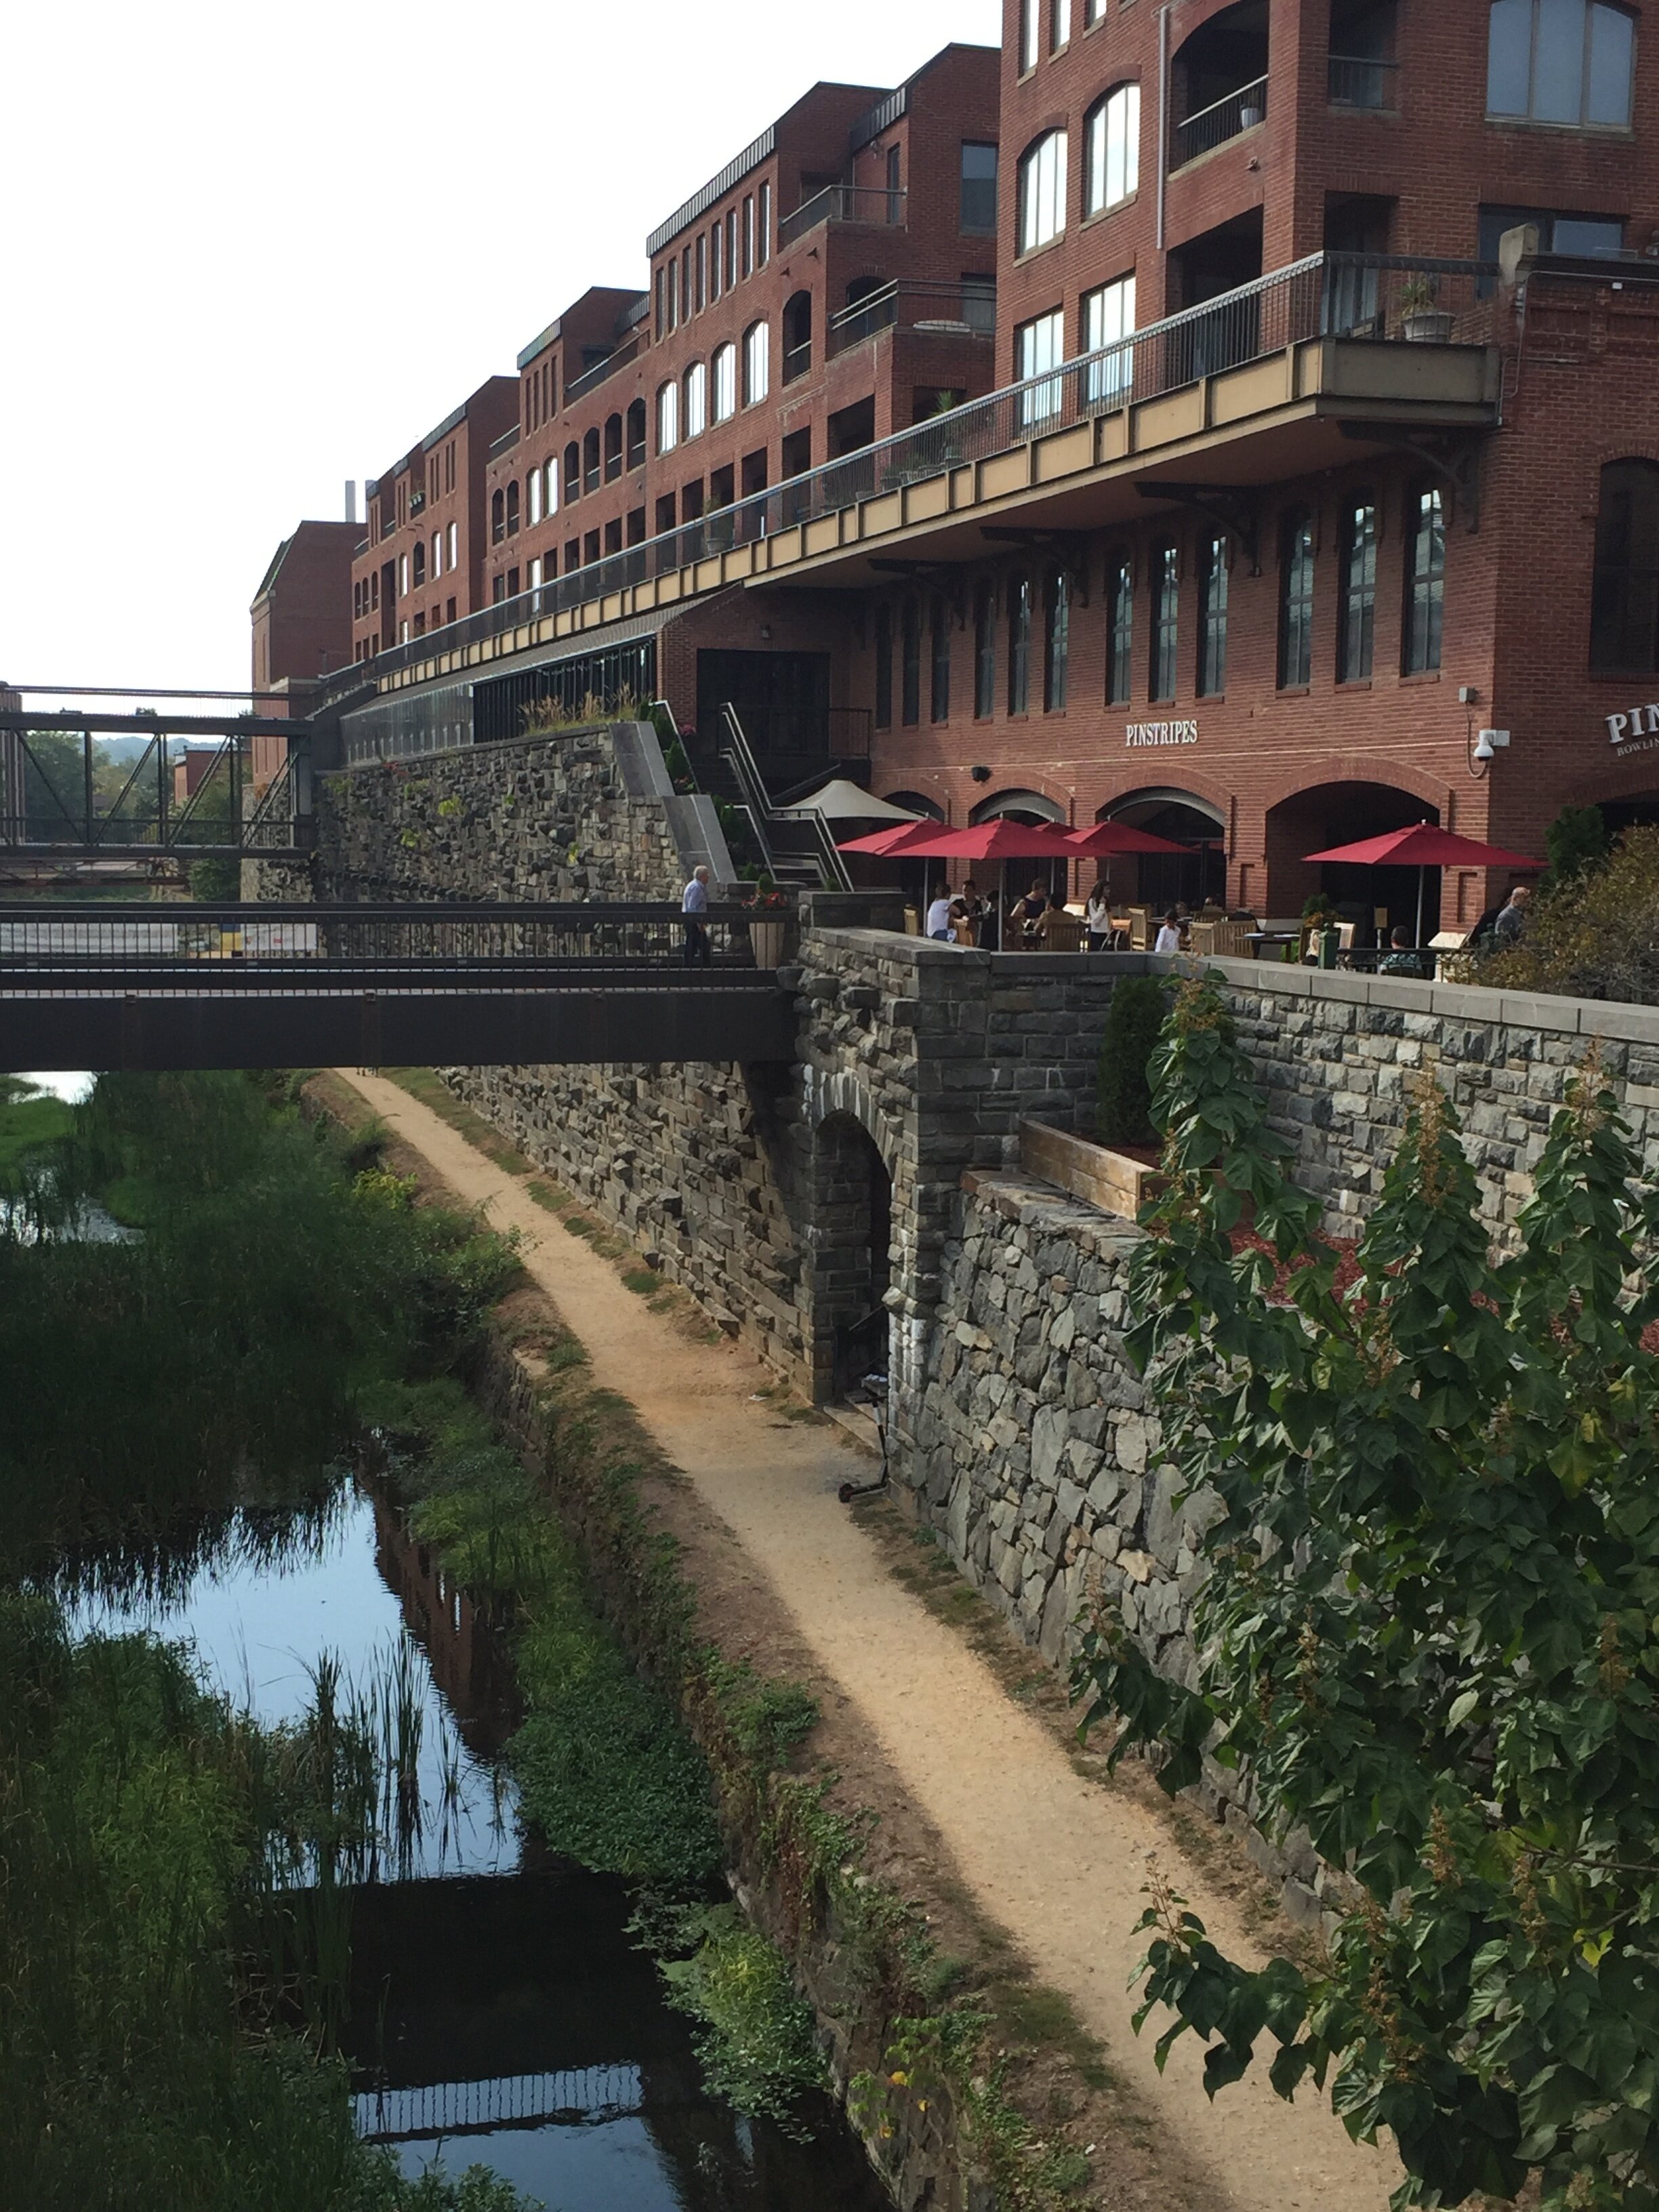 New places to run: C&amp;O canal and towpath.